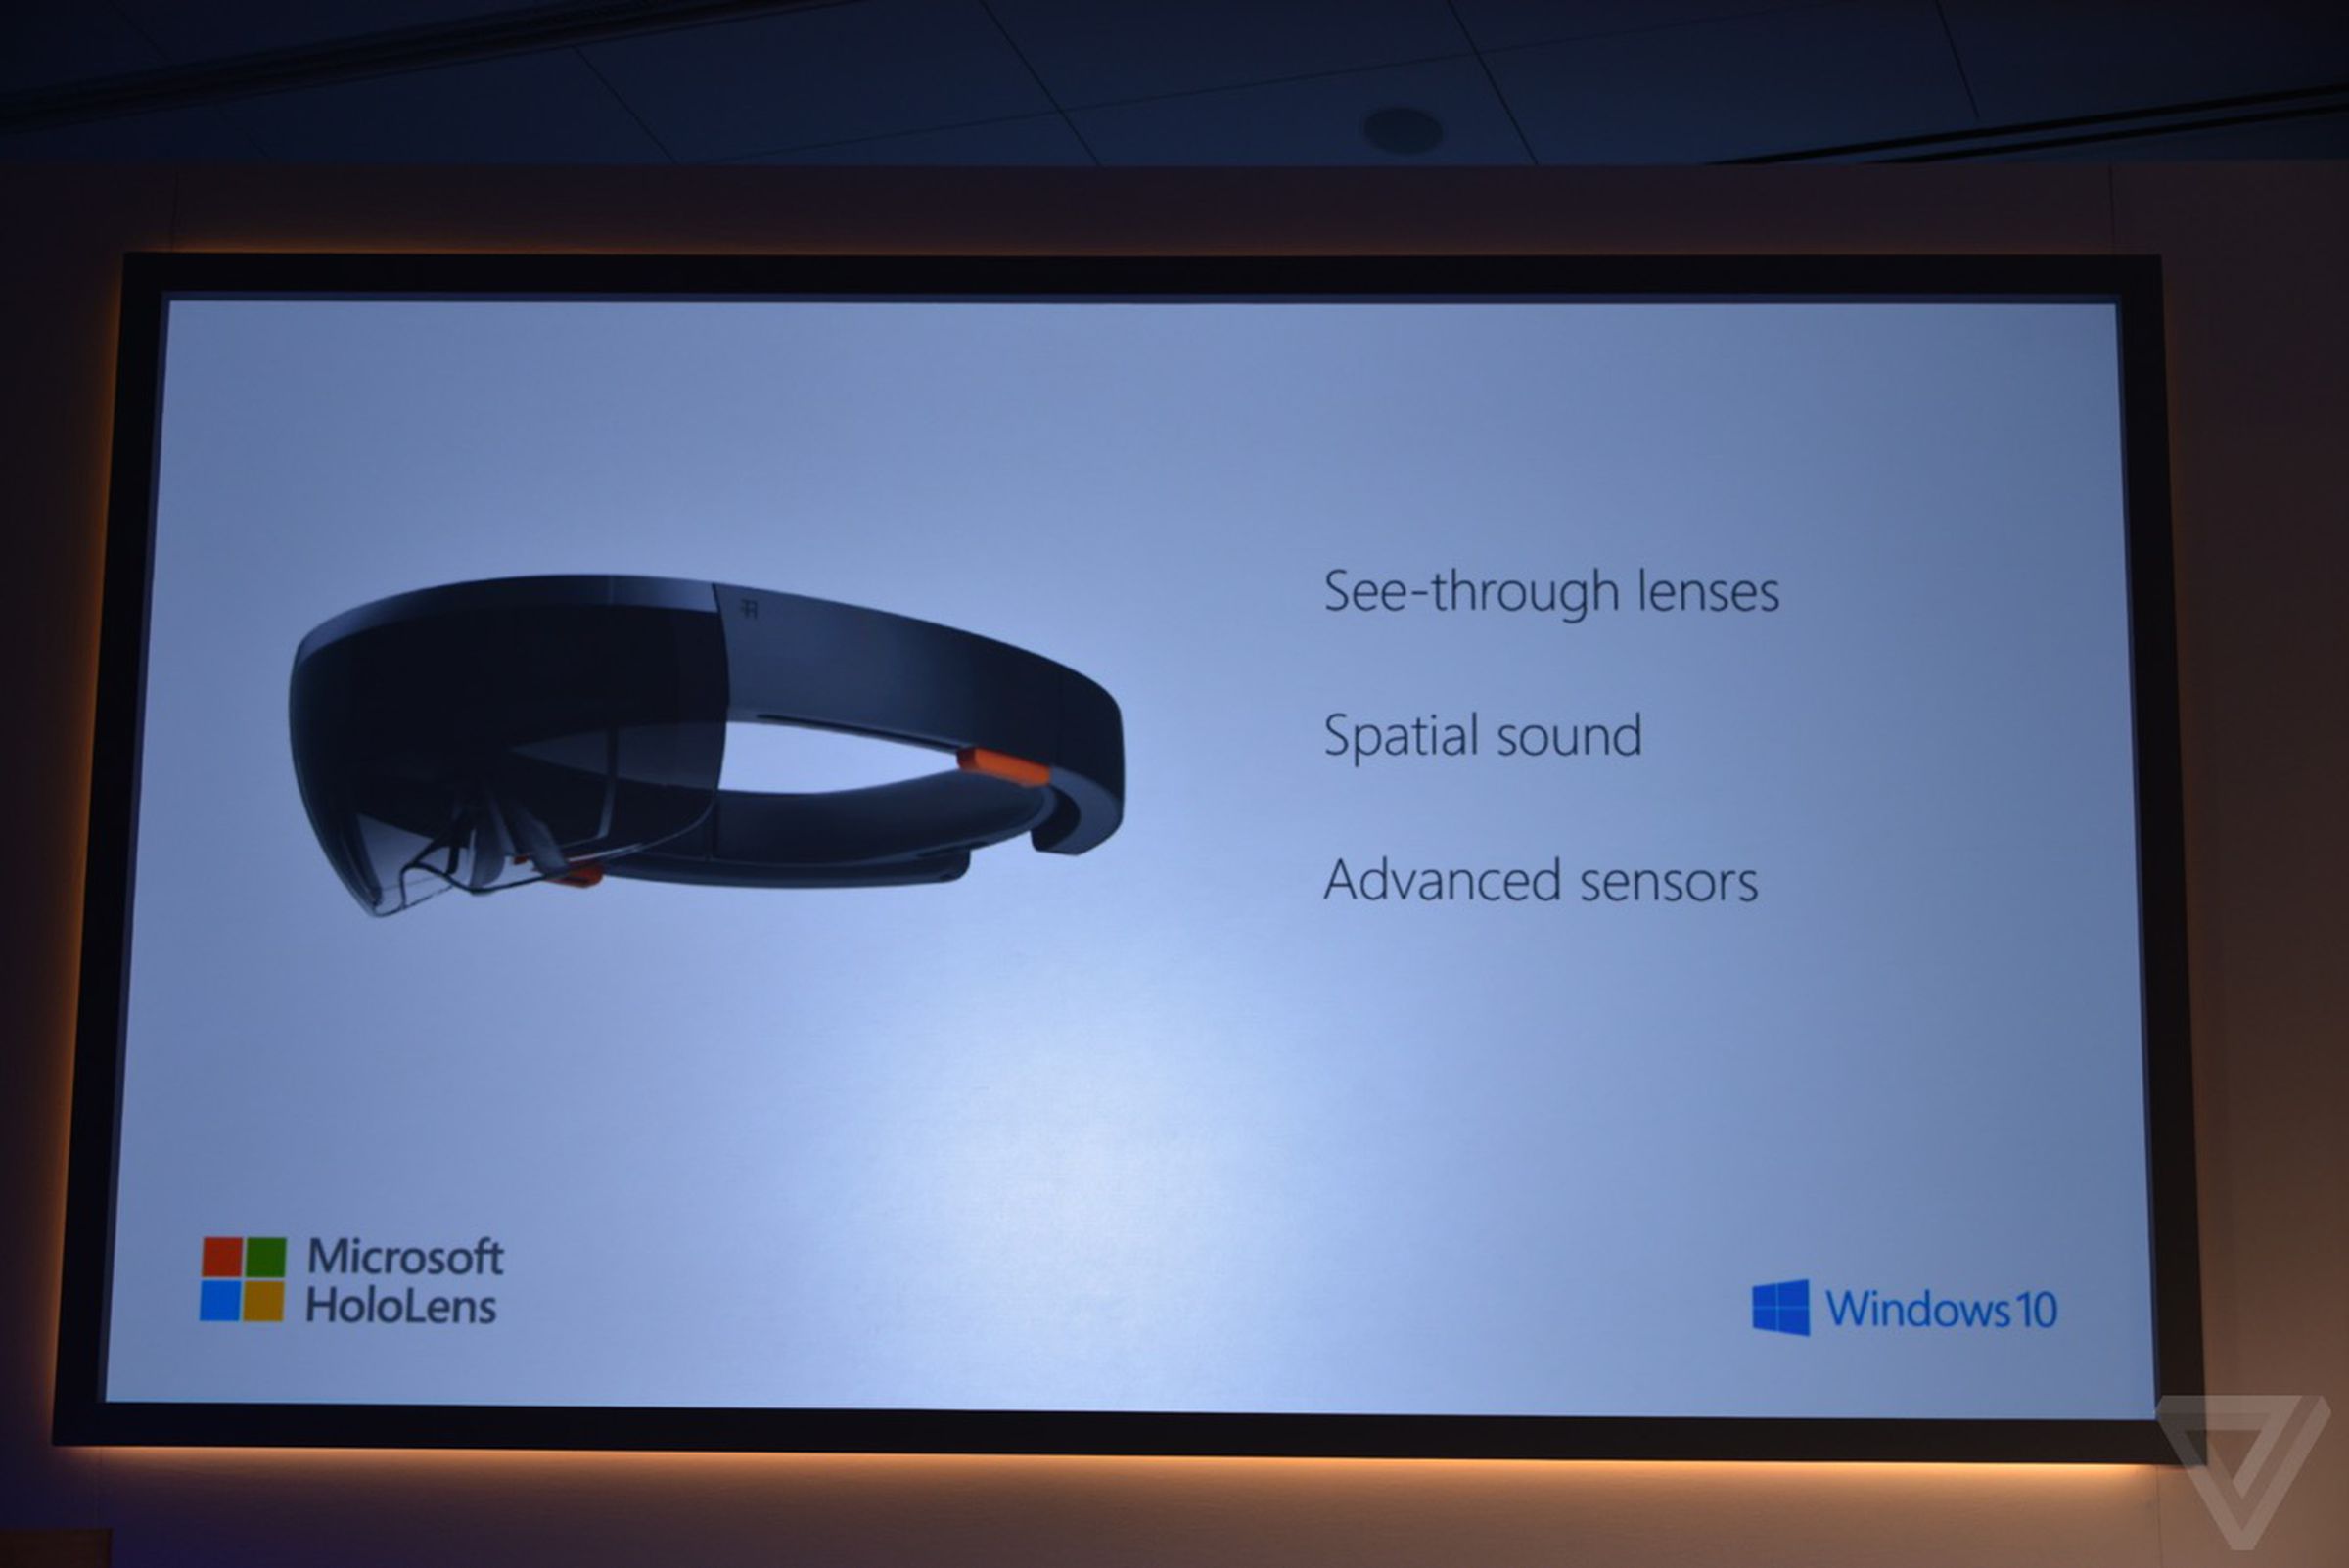 Windows Holographic in photos